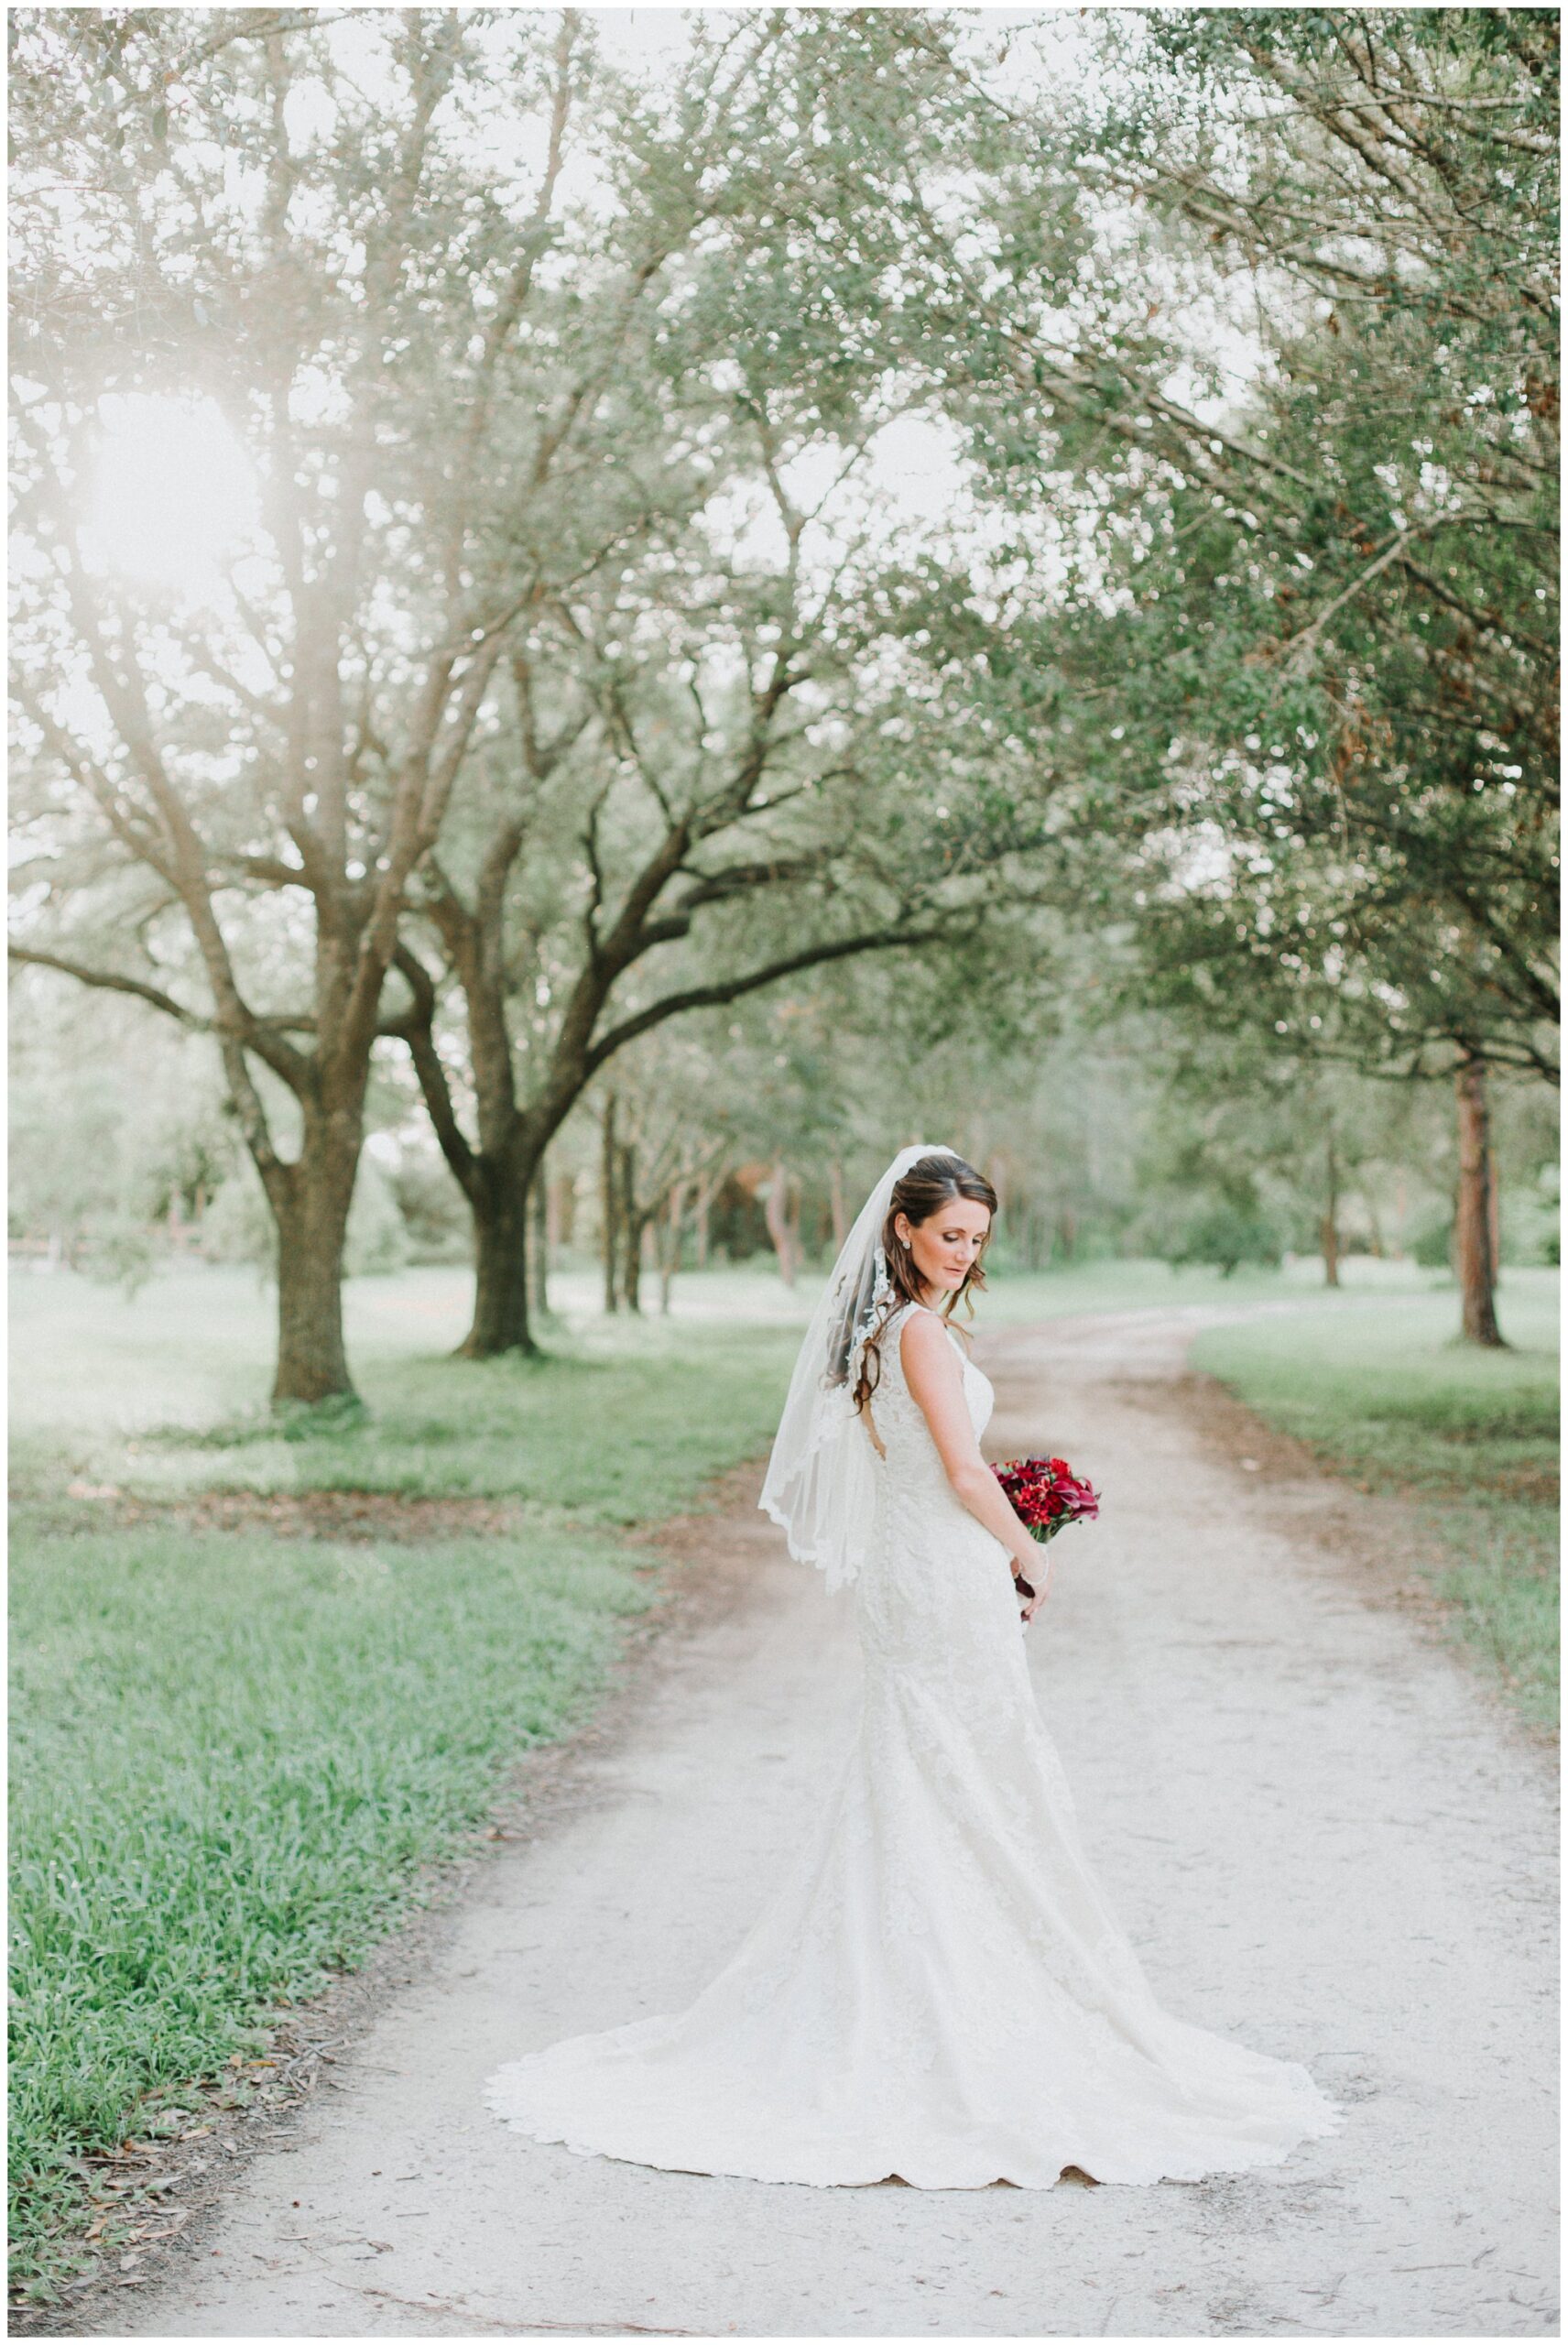 One of my favorite bridal portraits&nbsp;